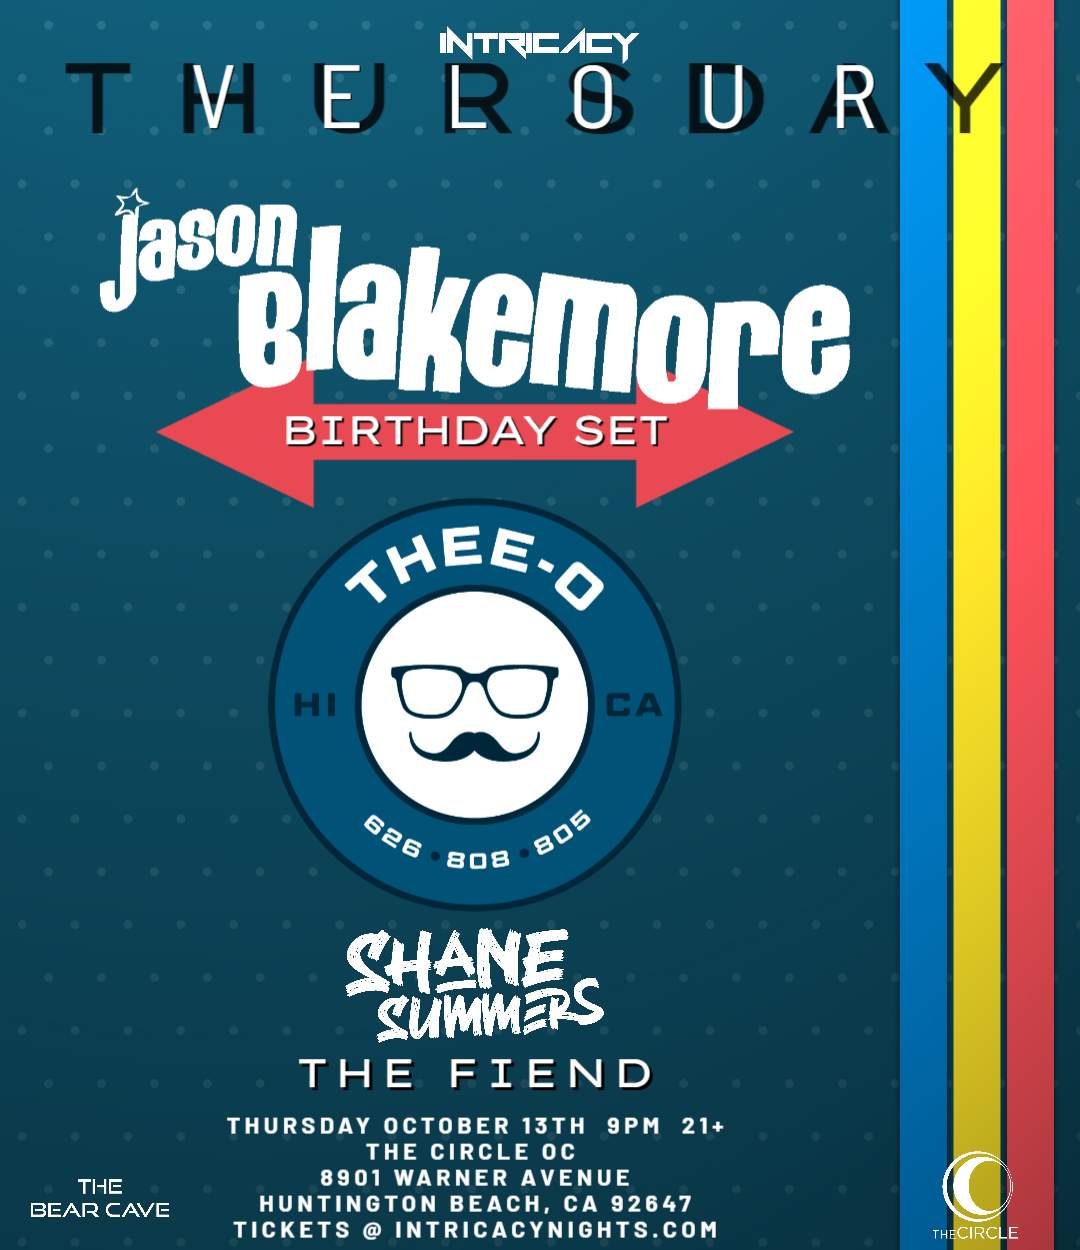 Jason Blakemore Birthday Party with special guest Thee-O - フライヤー表